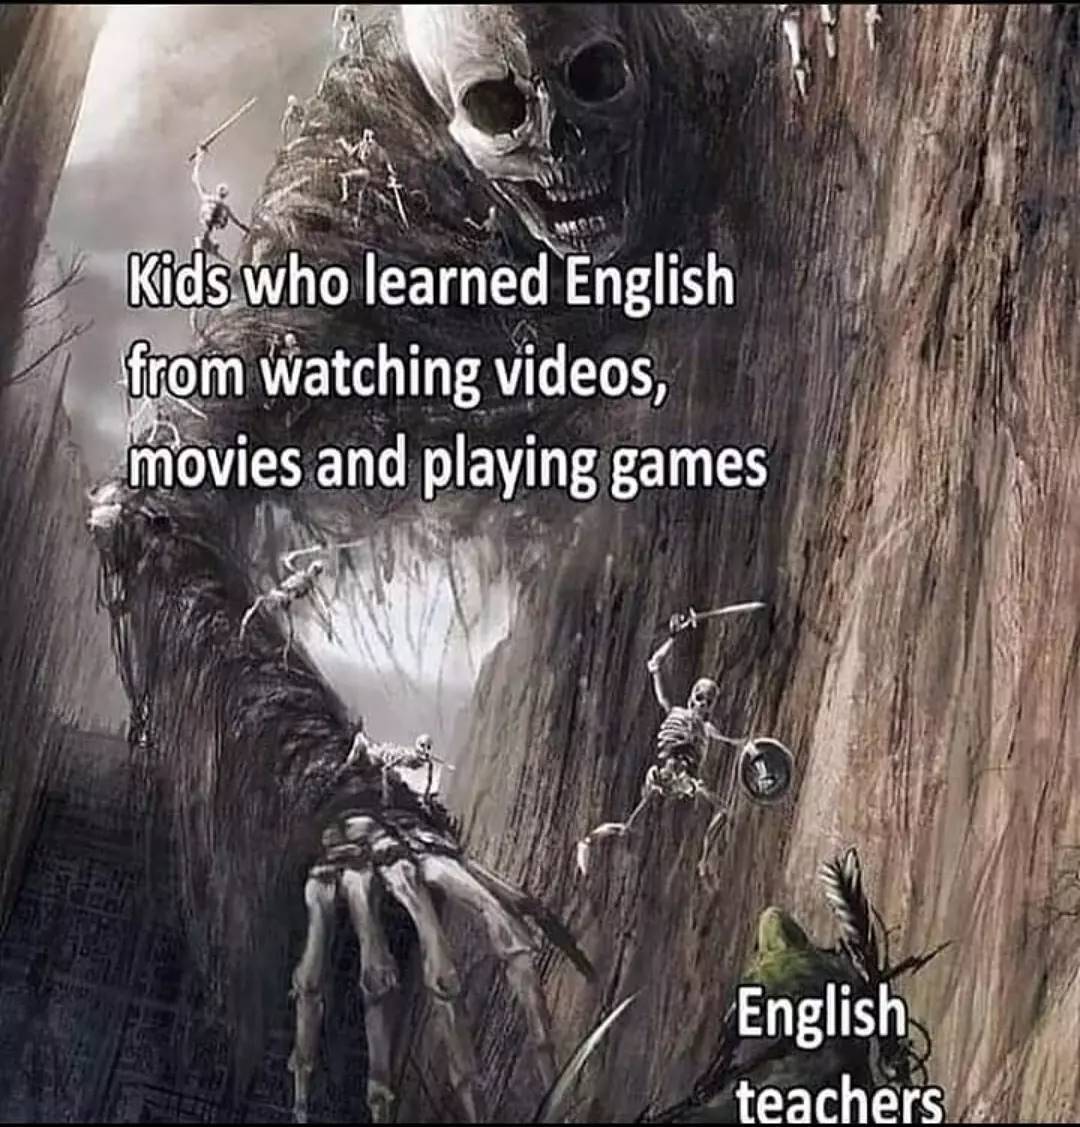 funny gaming memes - Kids who learned English from watching videos, movies and playing games English teachers